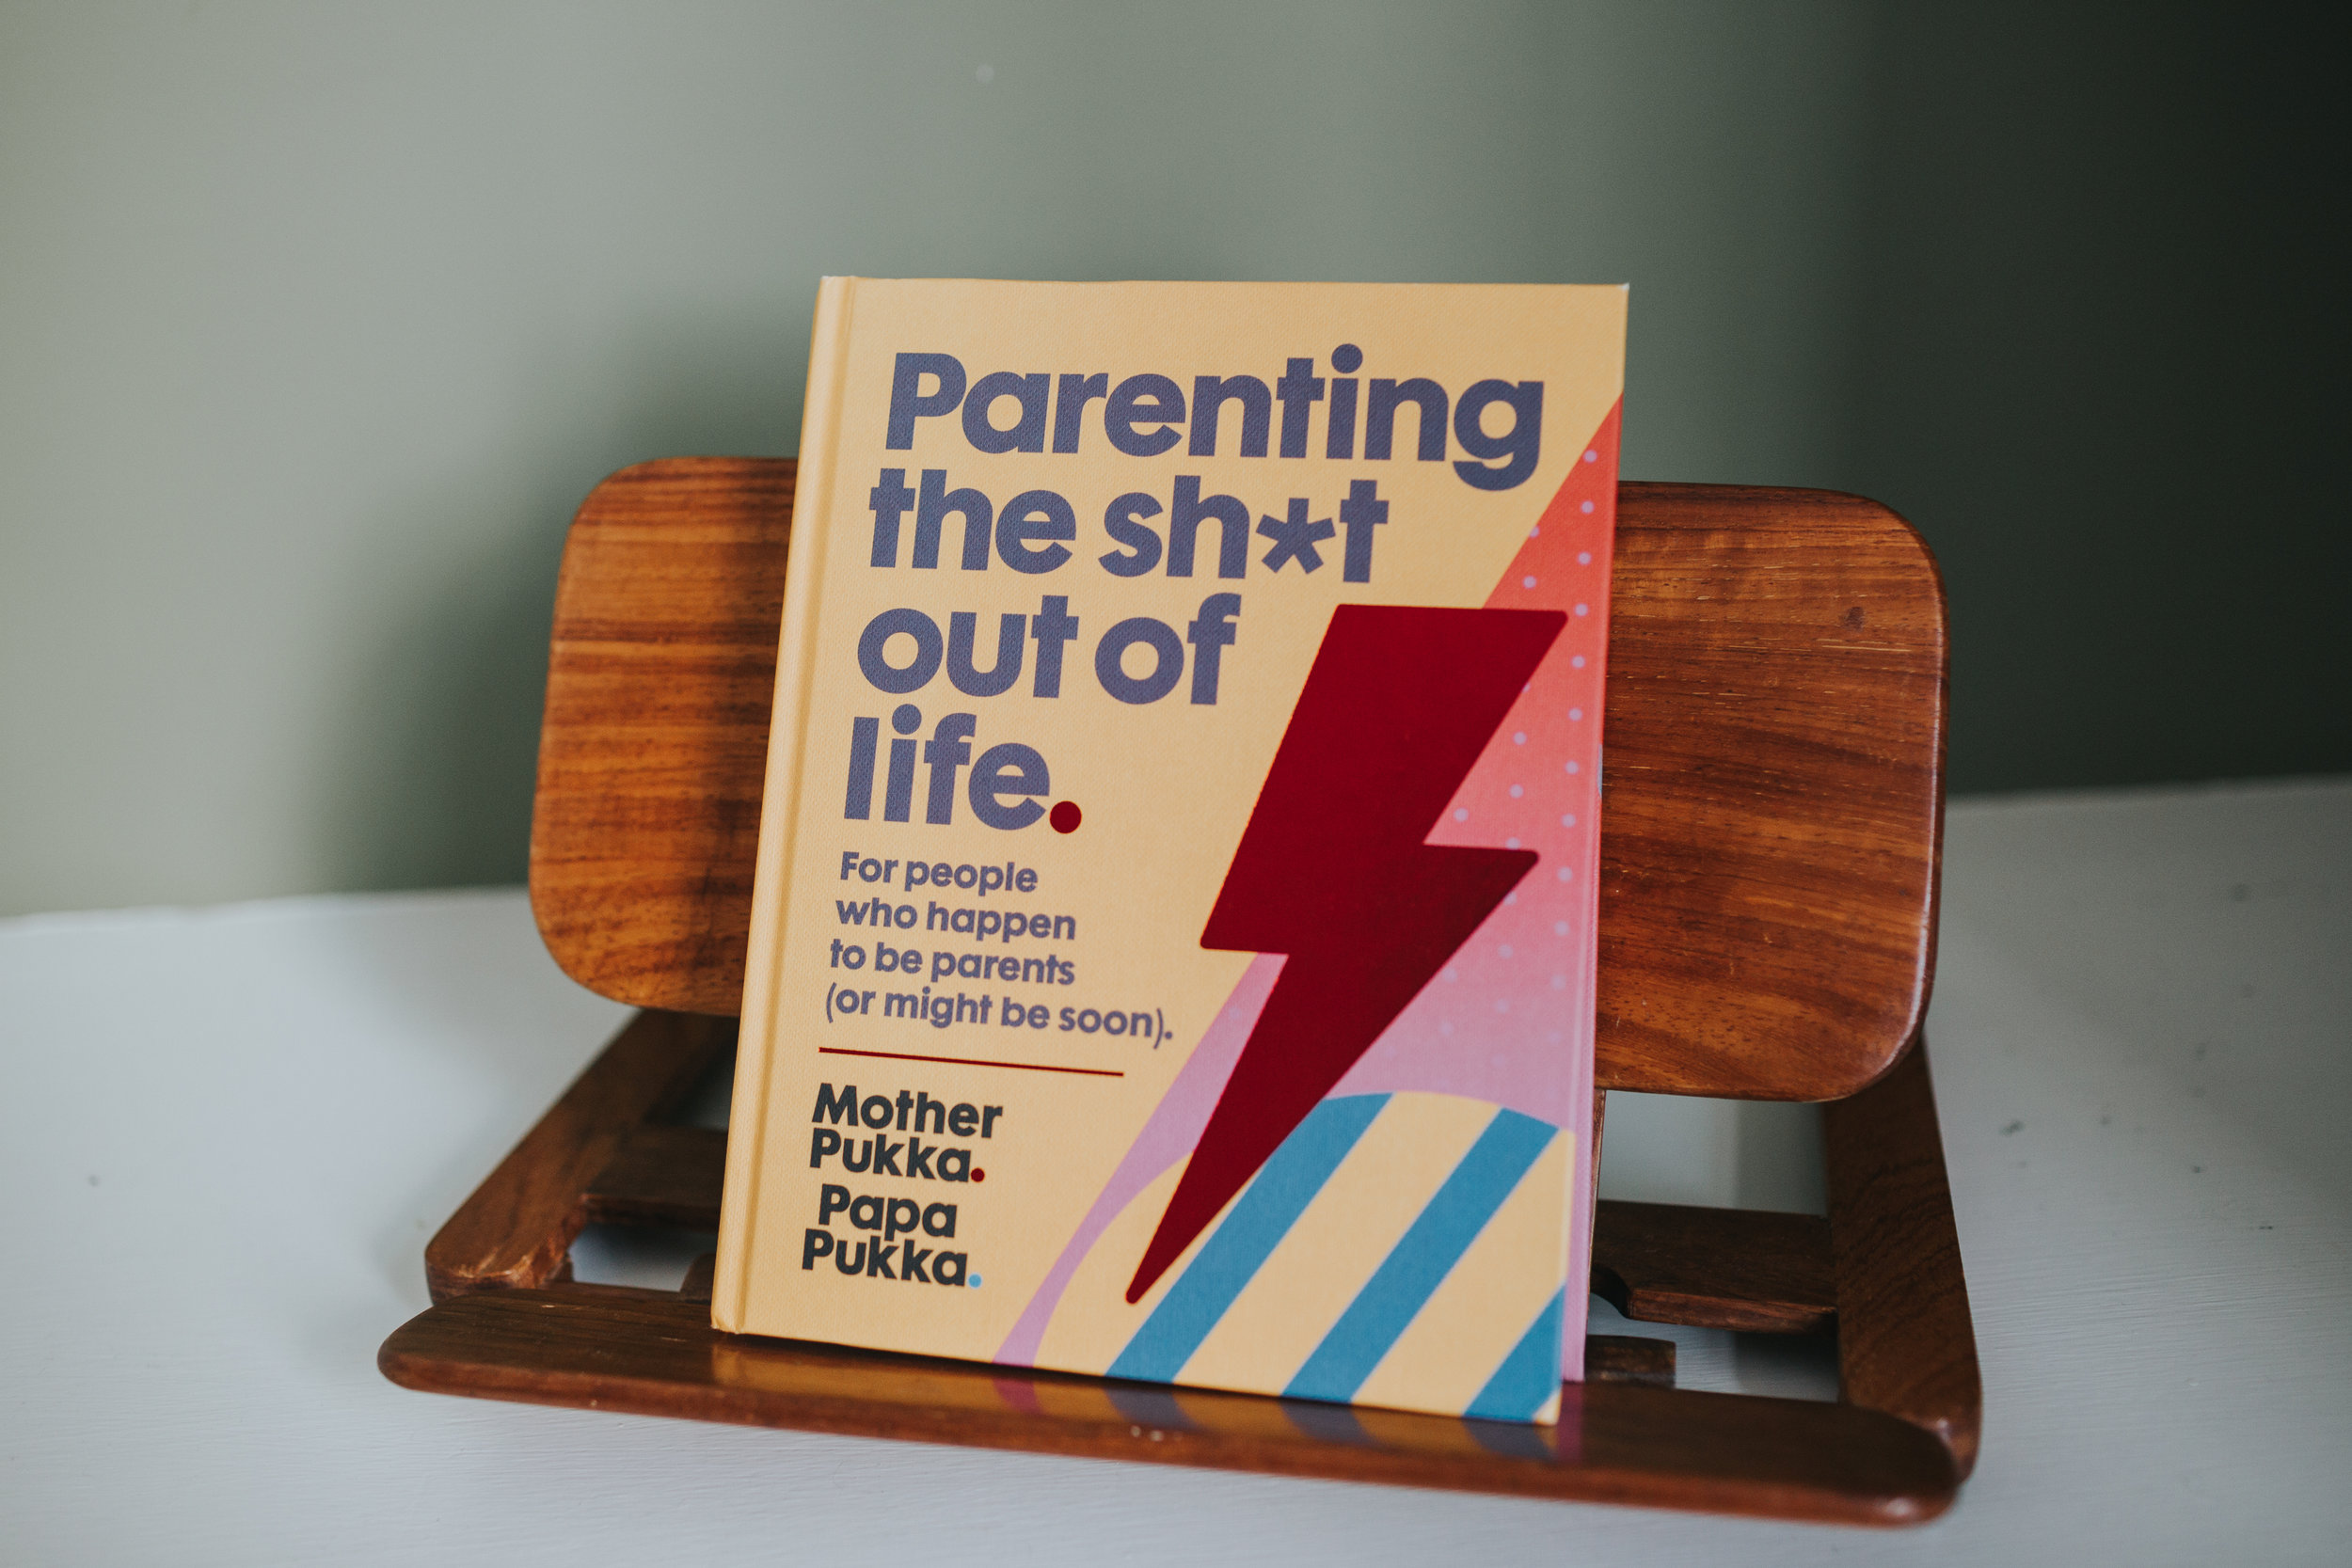 Parenting the Shit Out of Life book. Muther Pukka. Pappa Pukka. 